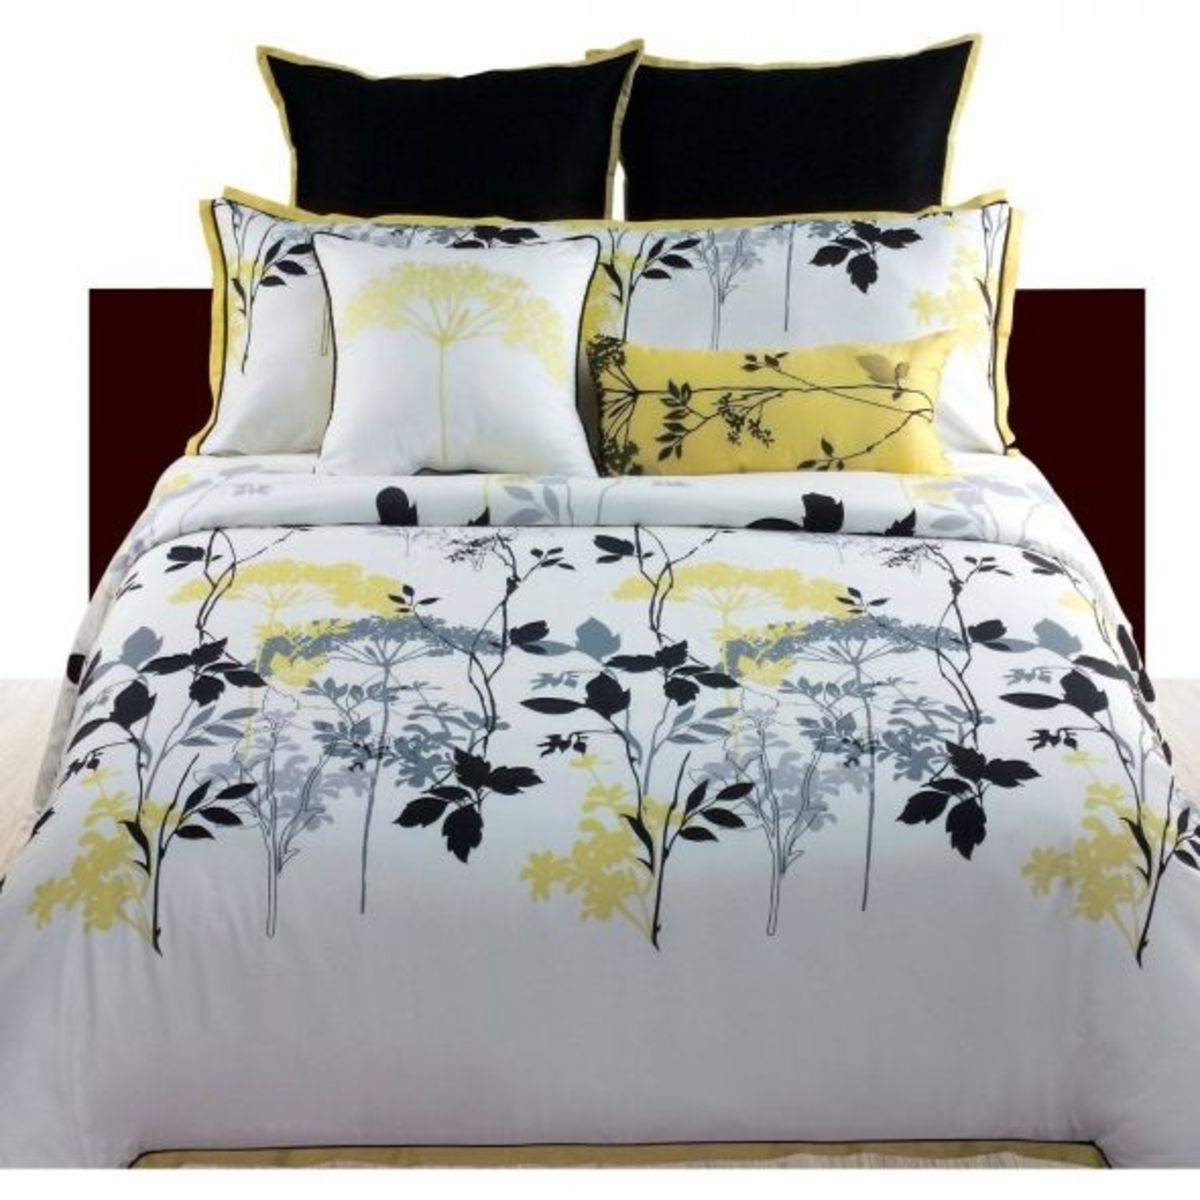 Grey And Yellow Bedding | HubPages